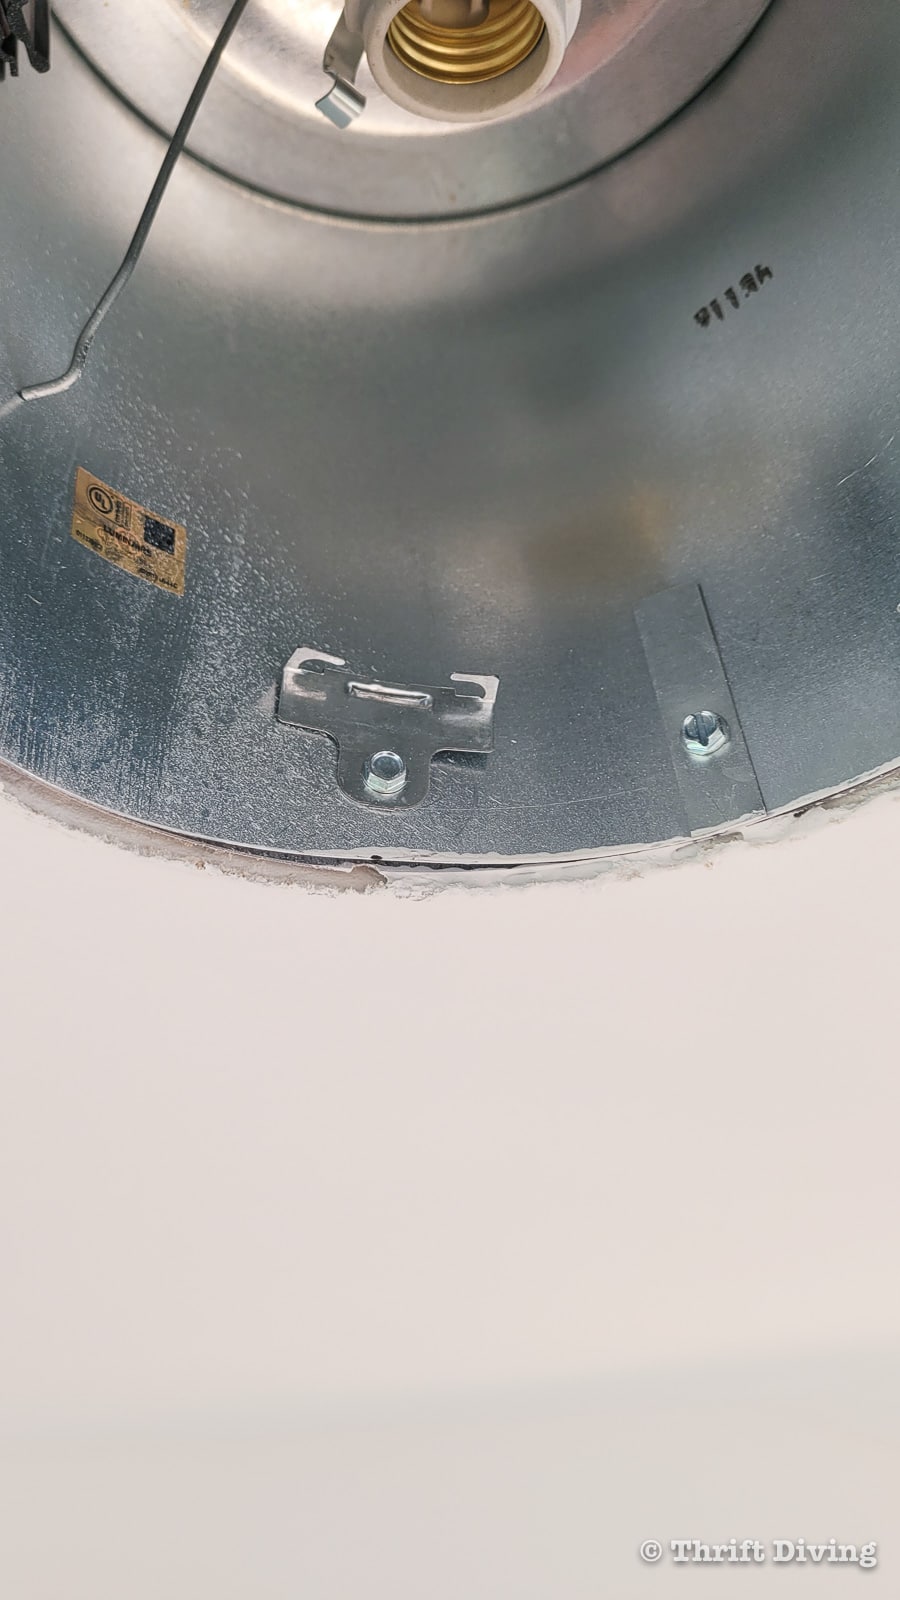 C-clip installed in recessed lights housing can retrofitted for LED downlights - Thrift Diving